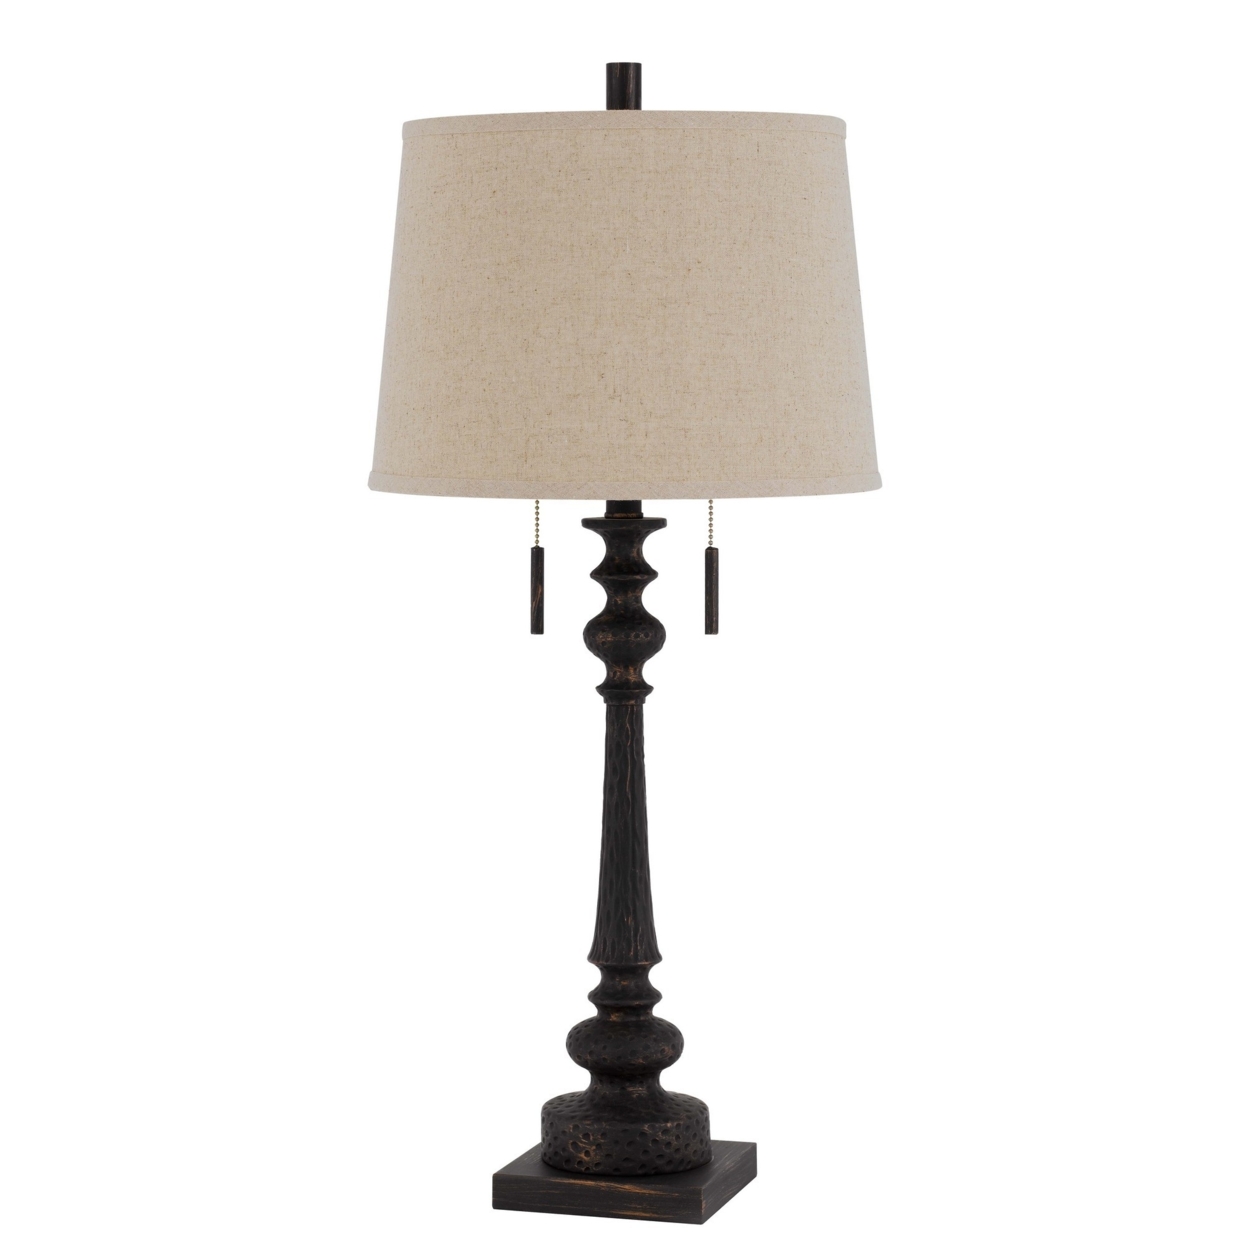 Table Lamp With Tubular Turned Resin Support And Pull Chain, Dark Bronze- Saltoro Sherpi